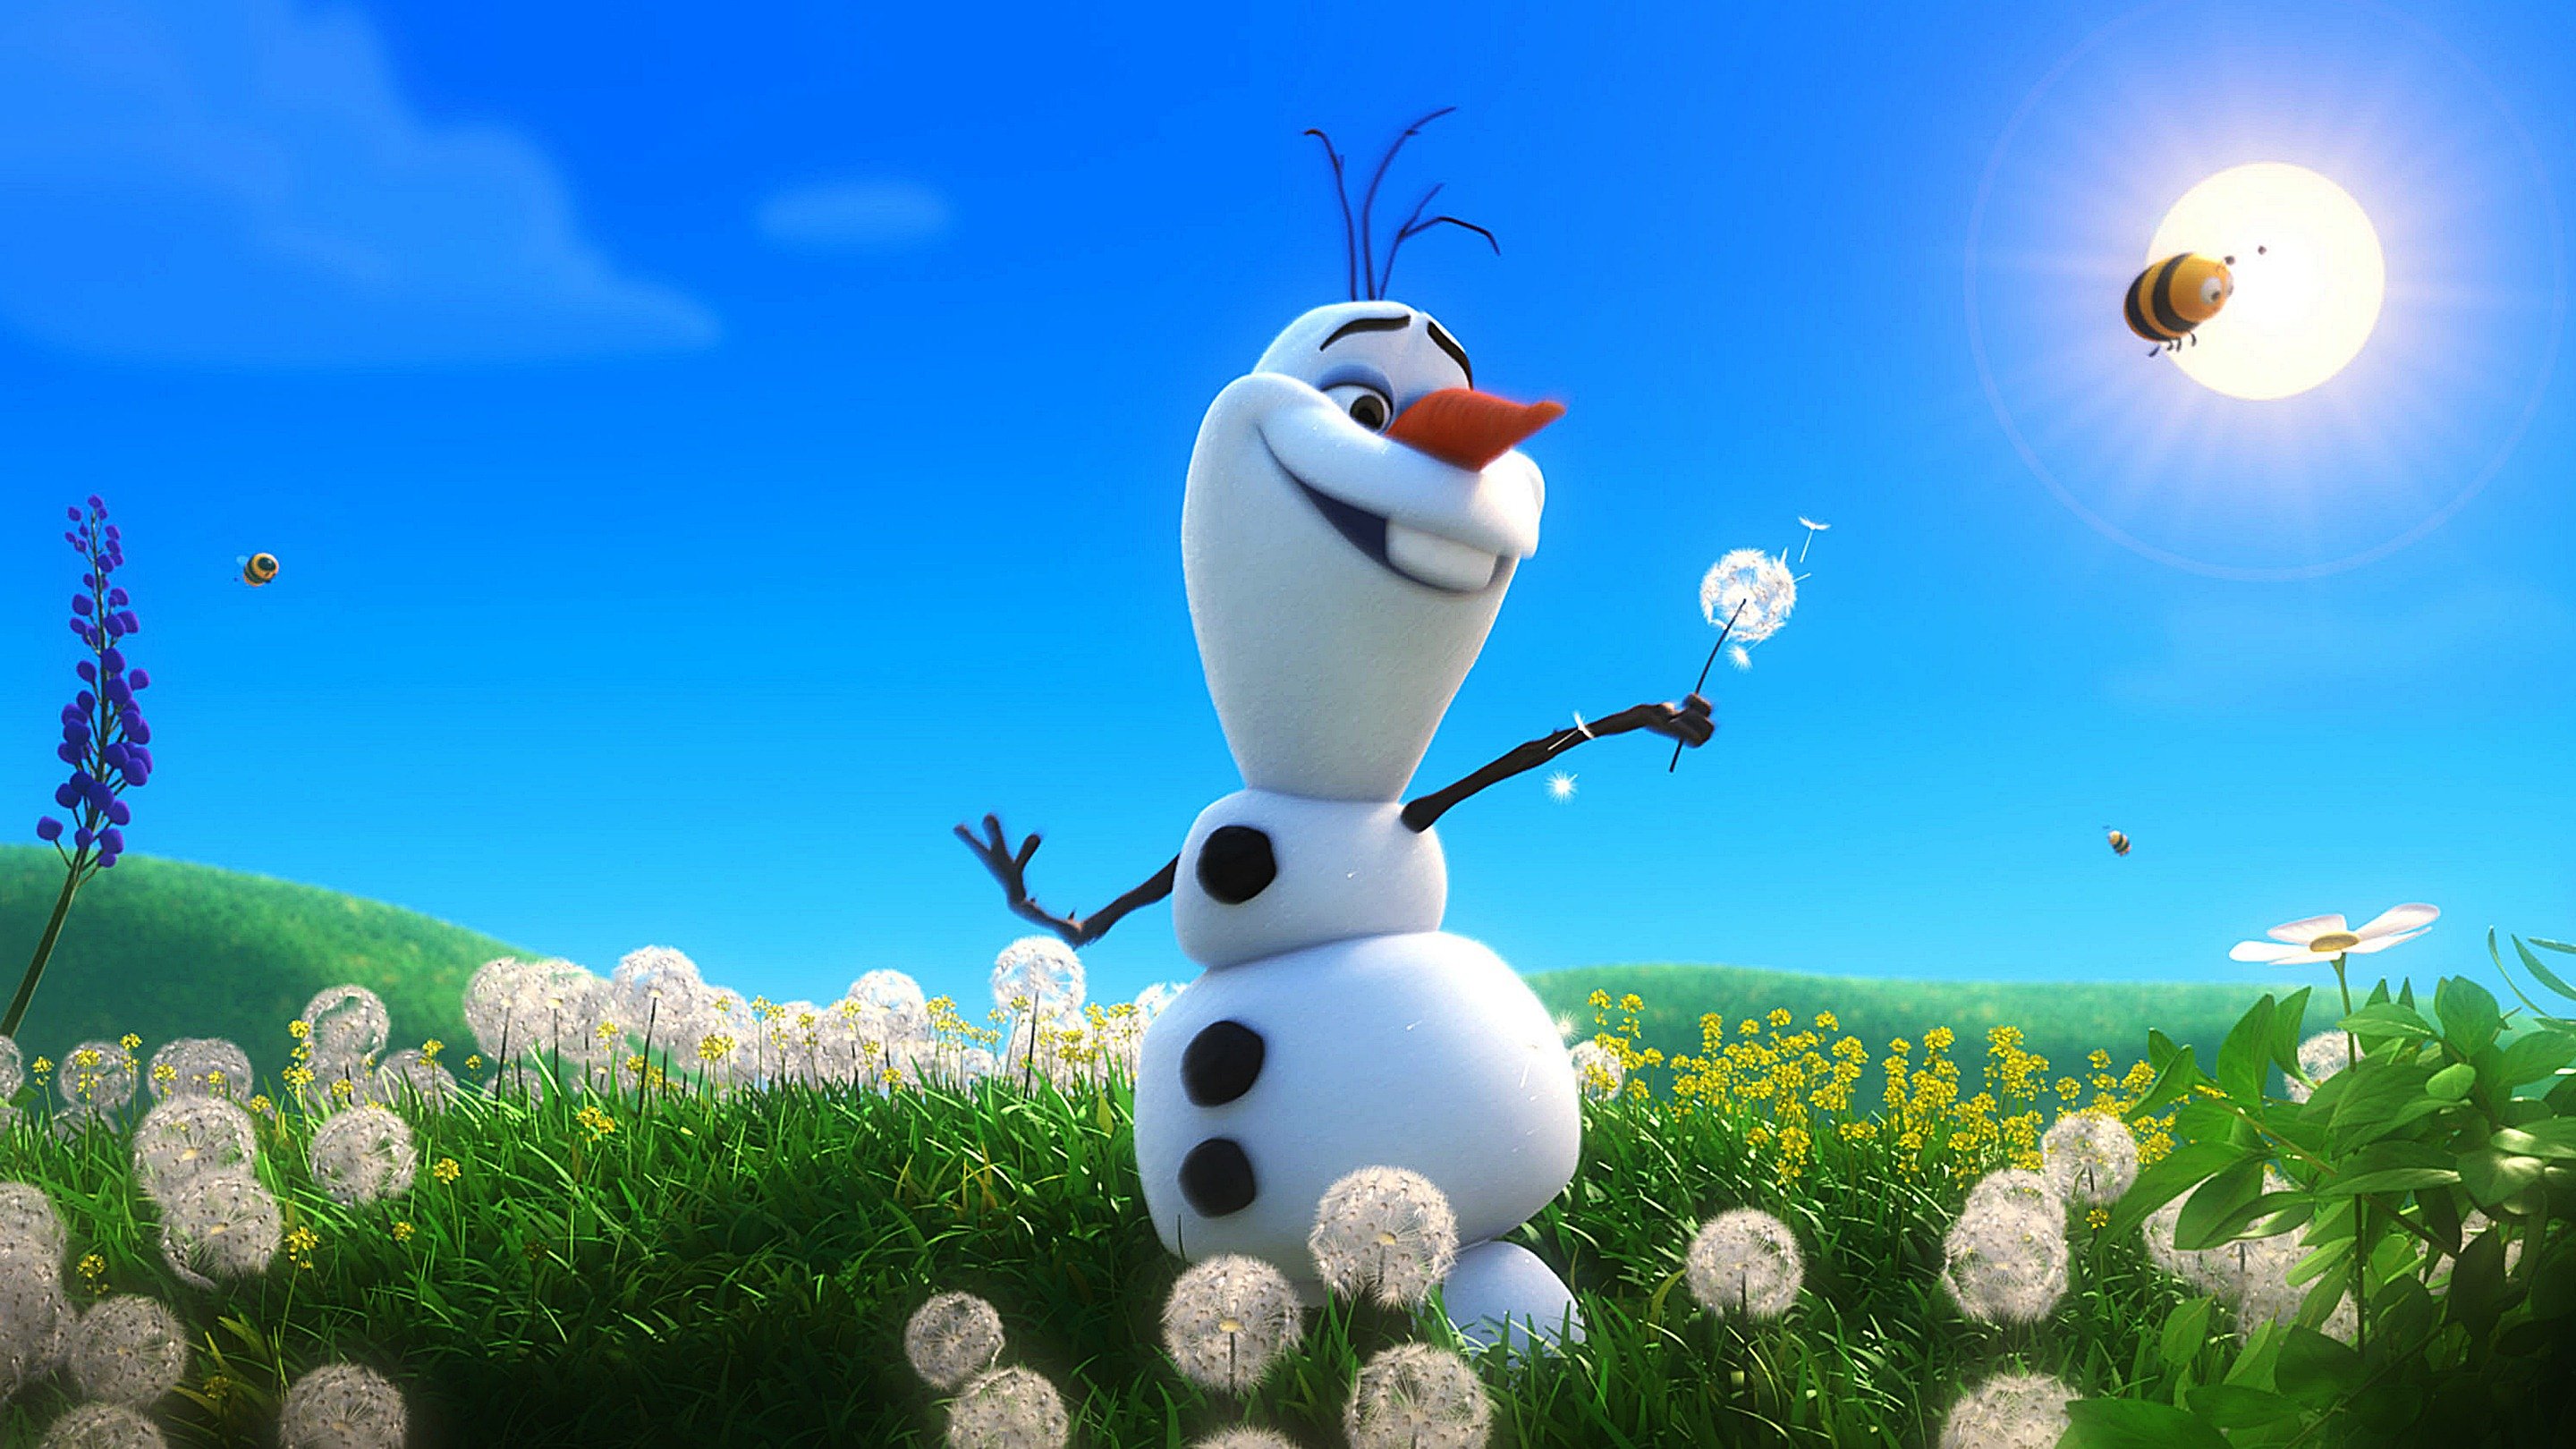 Funny Olaf Snowman In Summer Hd Wallpaper Download Cartoon picture